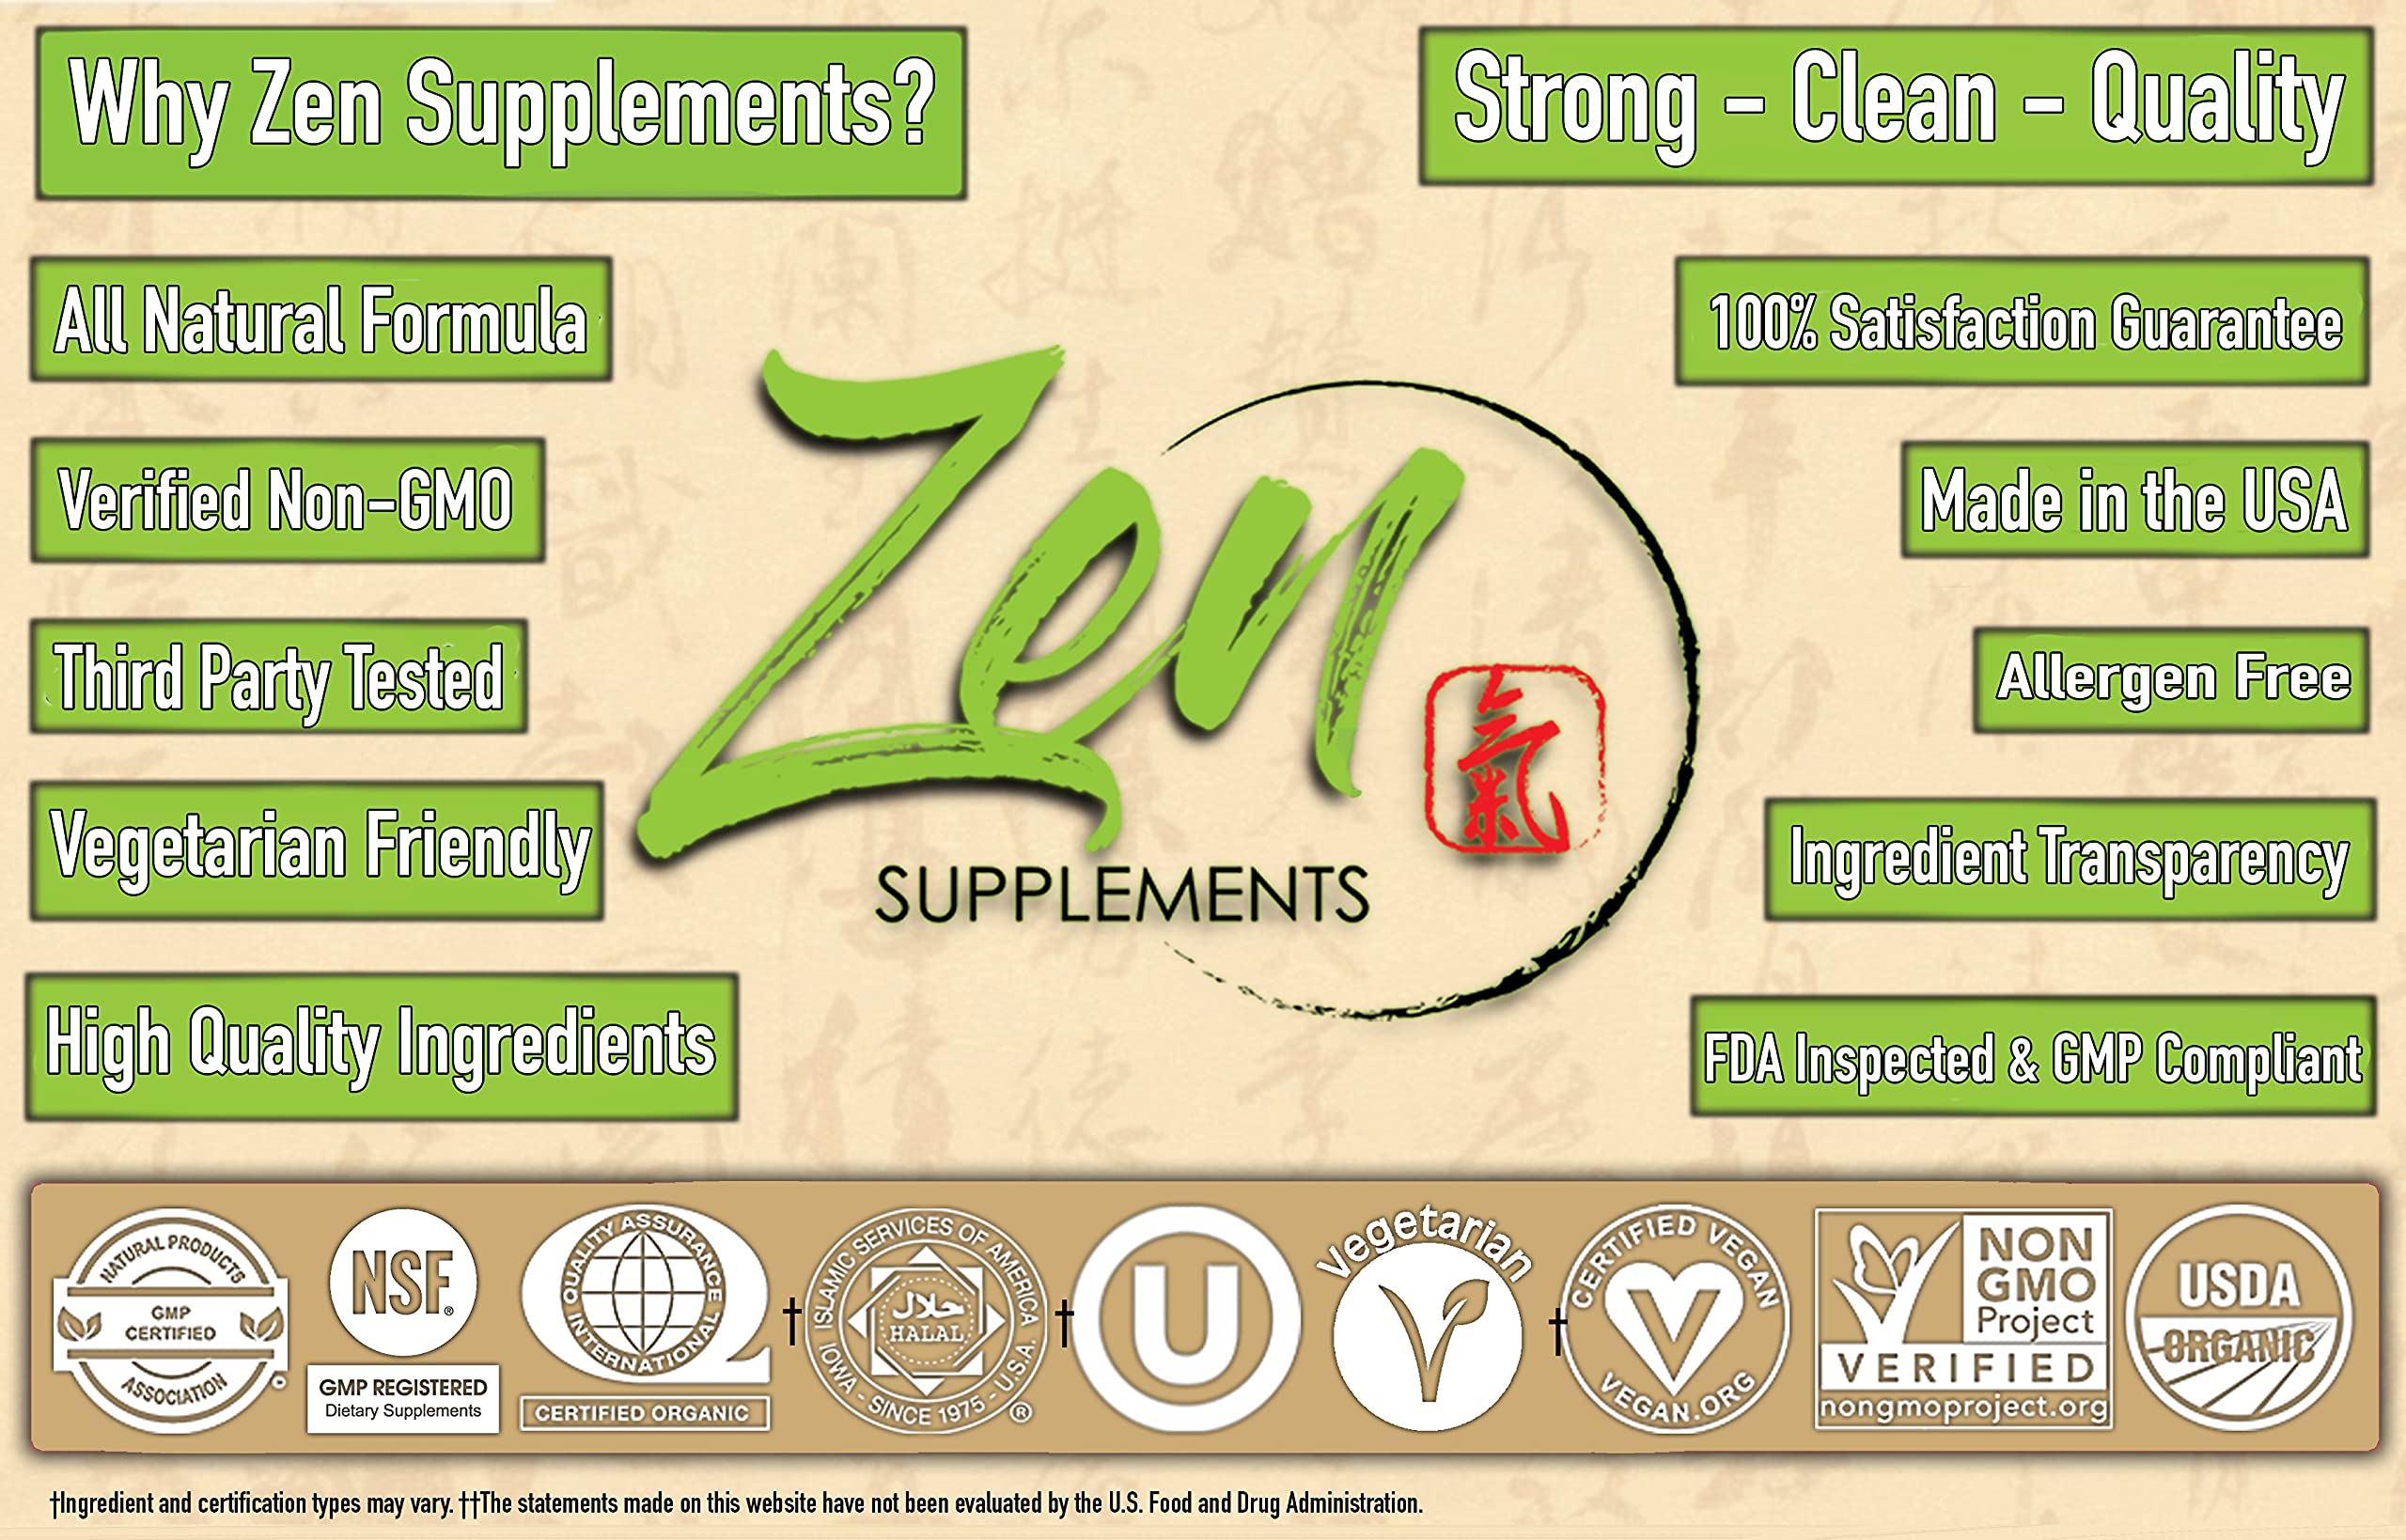 Zen Supplements - MCT Oil Powder 100% Pure MCT's - Perfect for Keto - Energy Boost, Nutrient Absorption, Appetite Control,Healthy Gut Support 292g, 10.3oz Powder